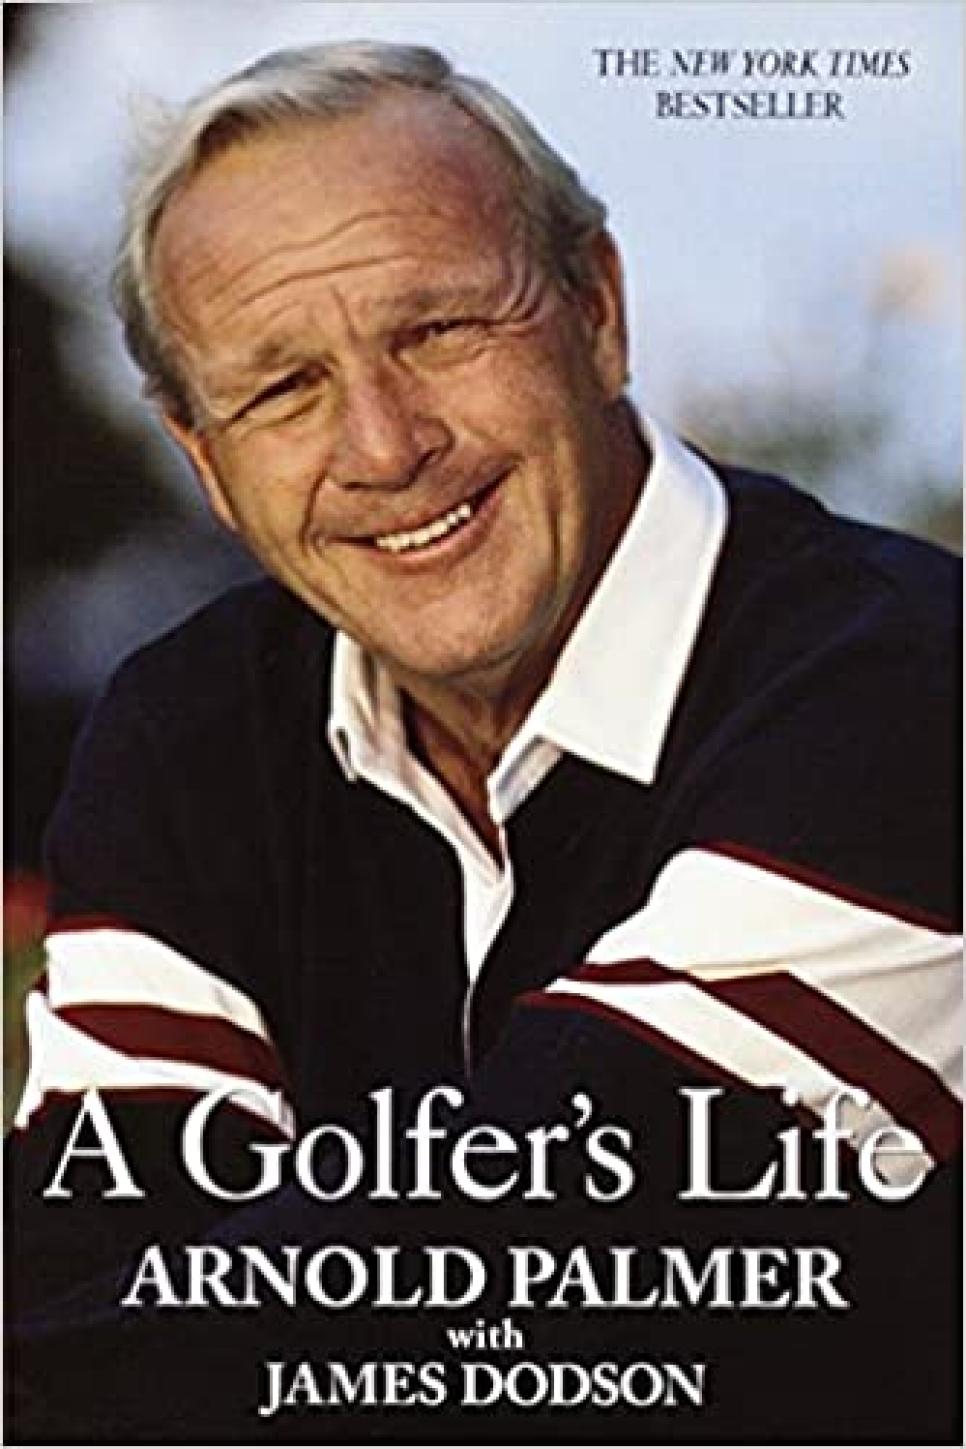 A Golfer's Life By Arnold Palmer, with James Dodson (1999)